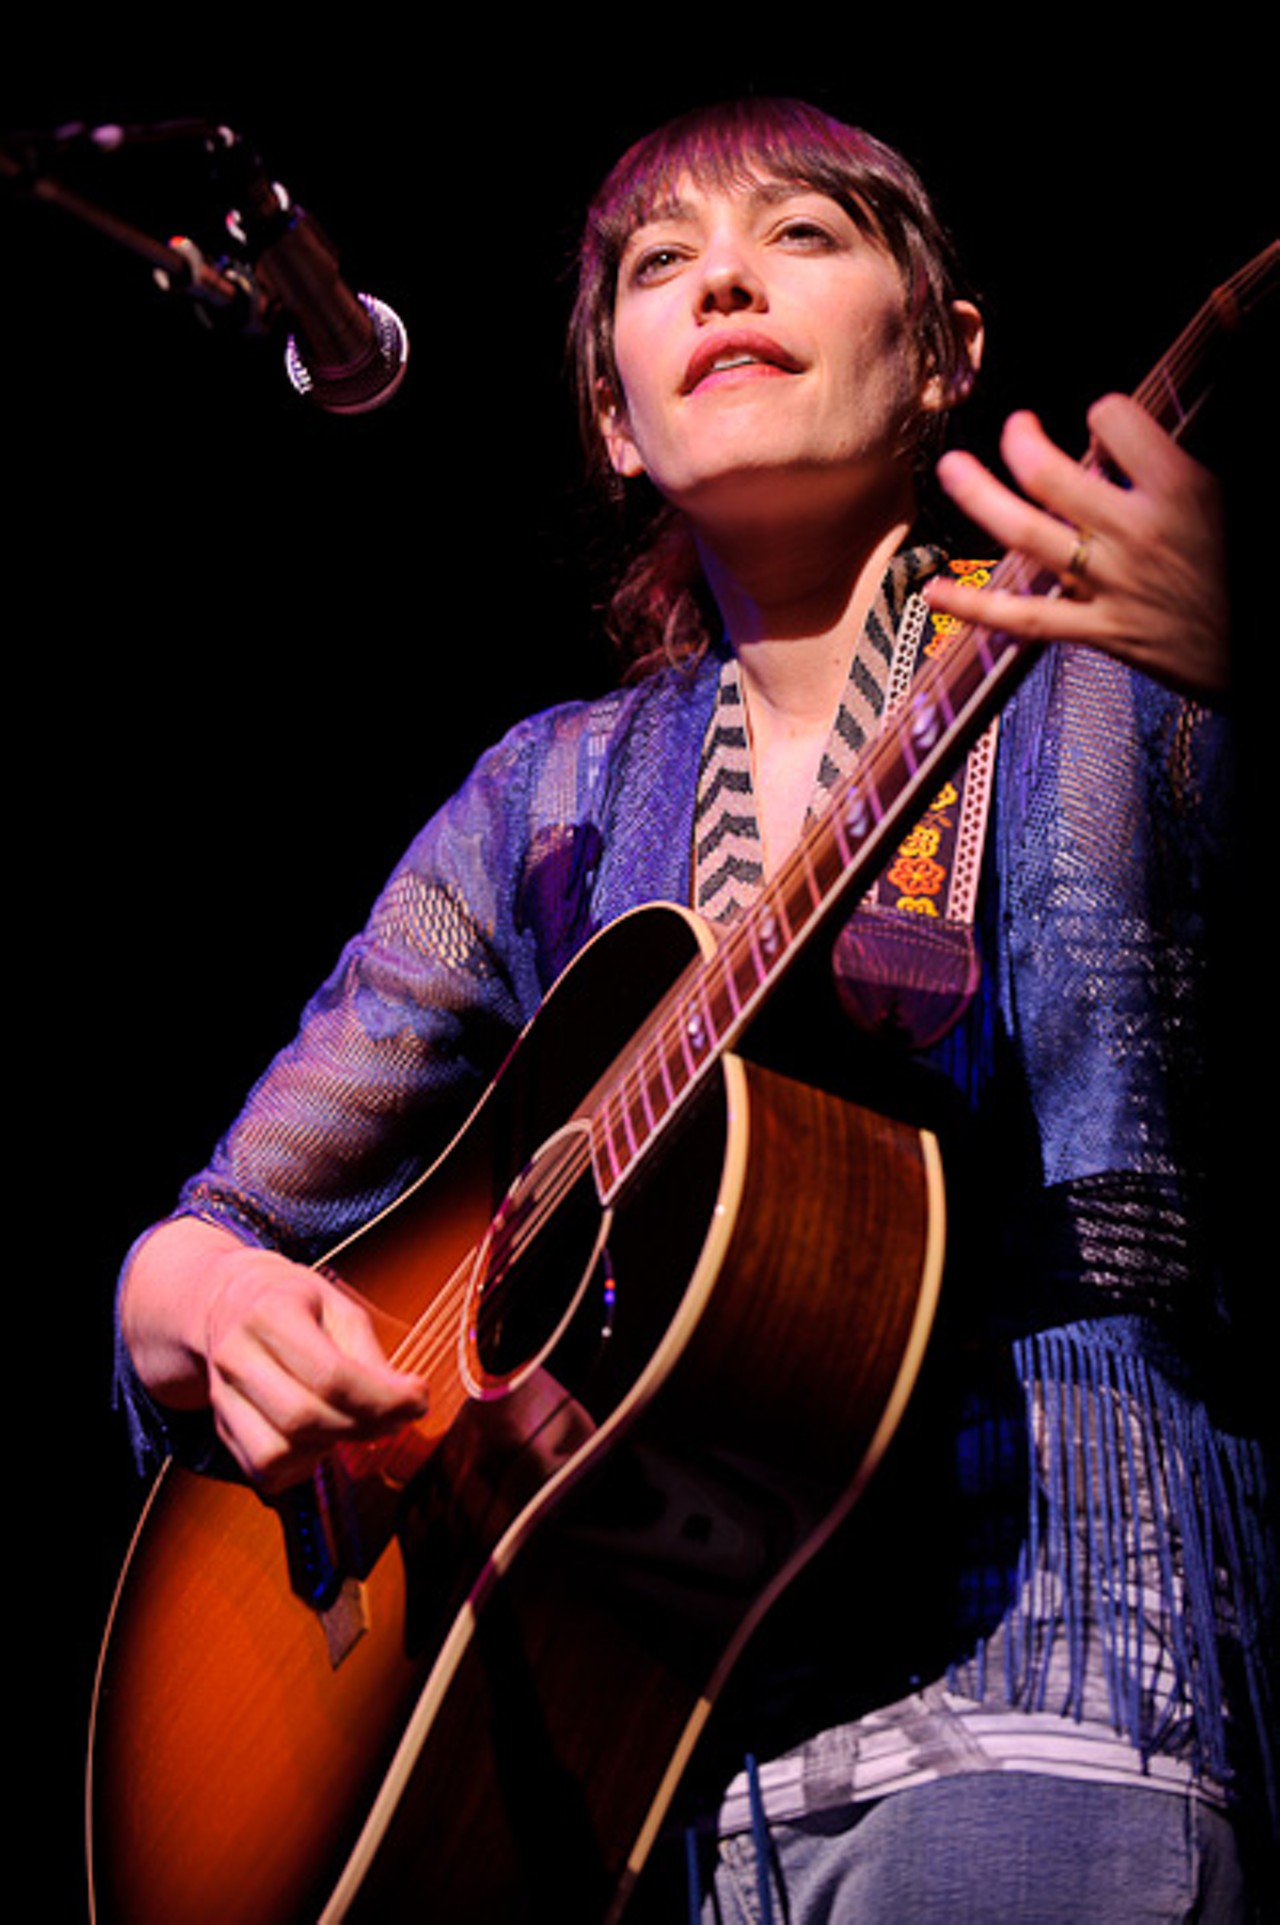 Iowa-based singer-songwriter Pieta Brown opens up the show on April 22, 2010 at the Fabulous Fox Theatre in support of headlining act Mark Knopfler.